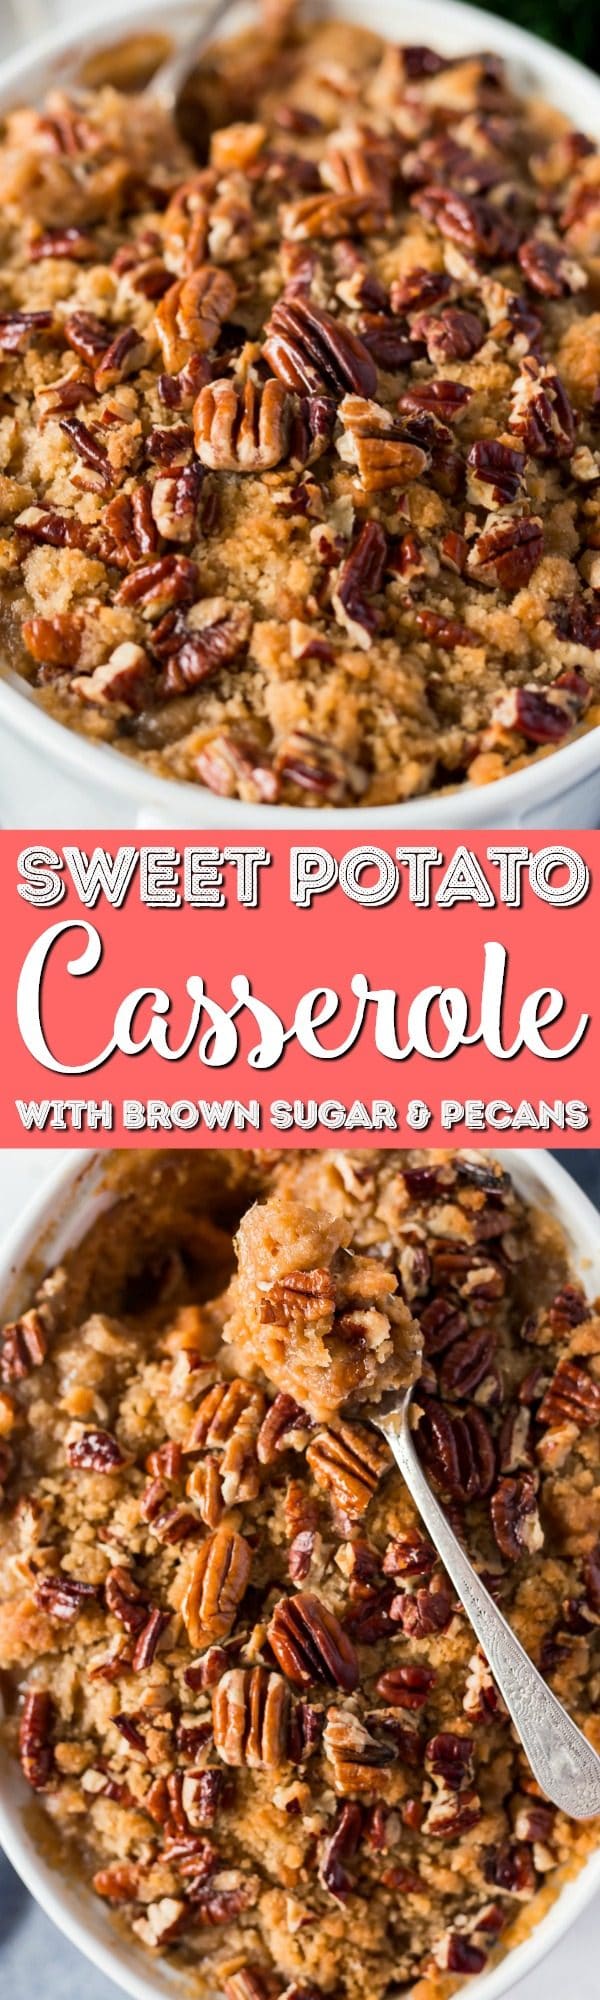 This Sweet Potato Casserole is loaded with rich and cozy flavors of brown sugar, cinnamon, and nutmeg. It's laced with butter and crunchy pecans, the perfect holiday side dish!